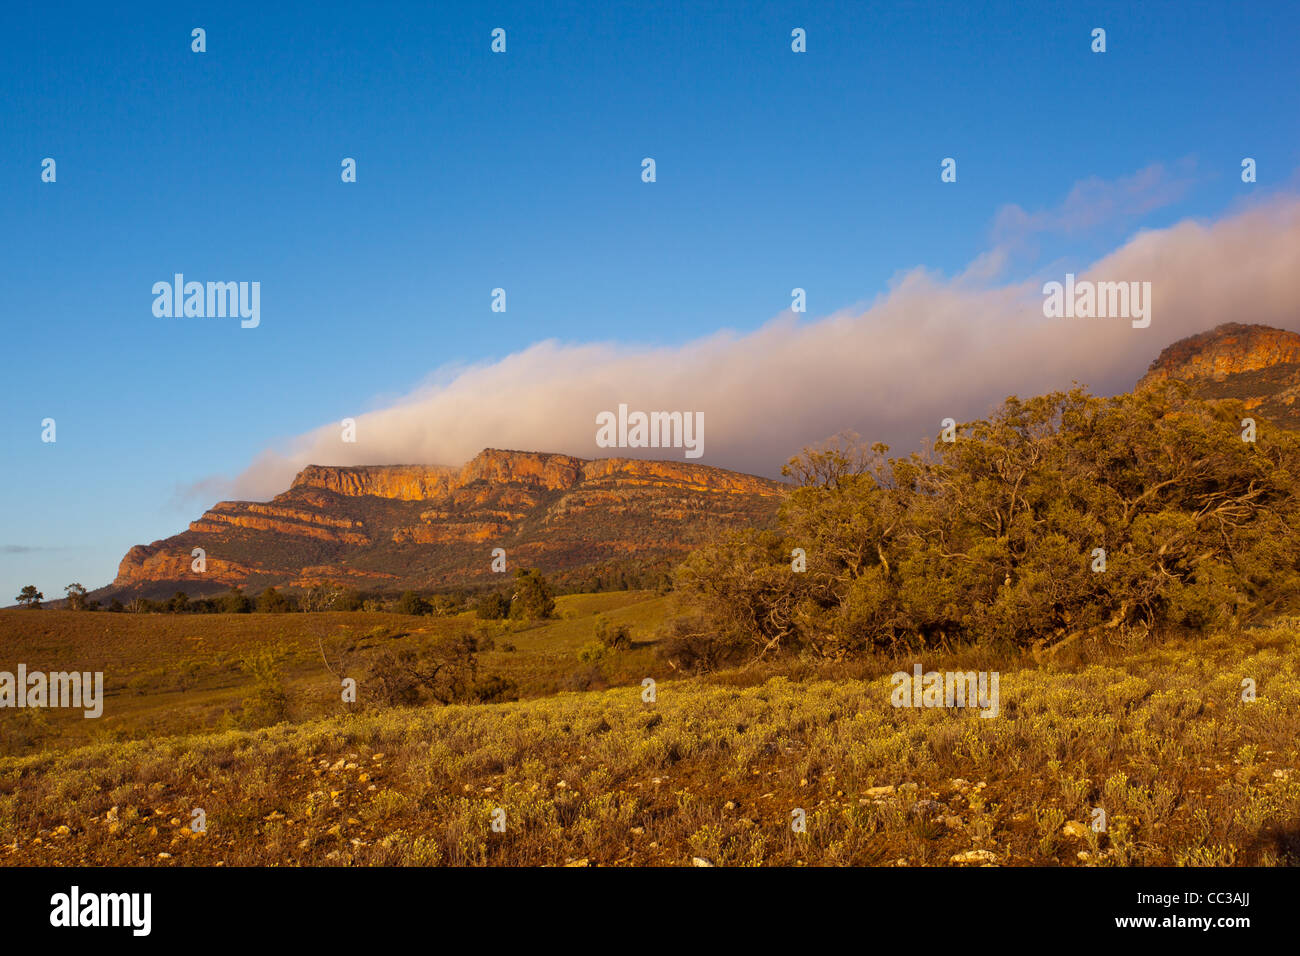 Early morning view of Rawnsley Bluff and Wilpena Pound in the Flinders Ranges in outback South Australia, Australia Stock Photo